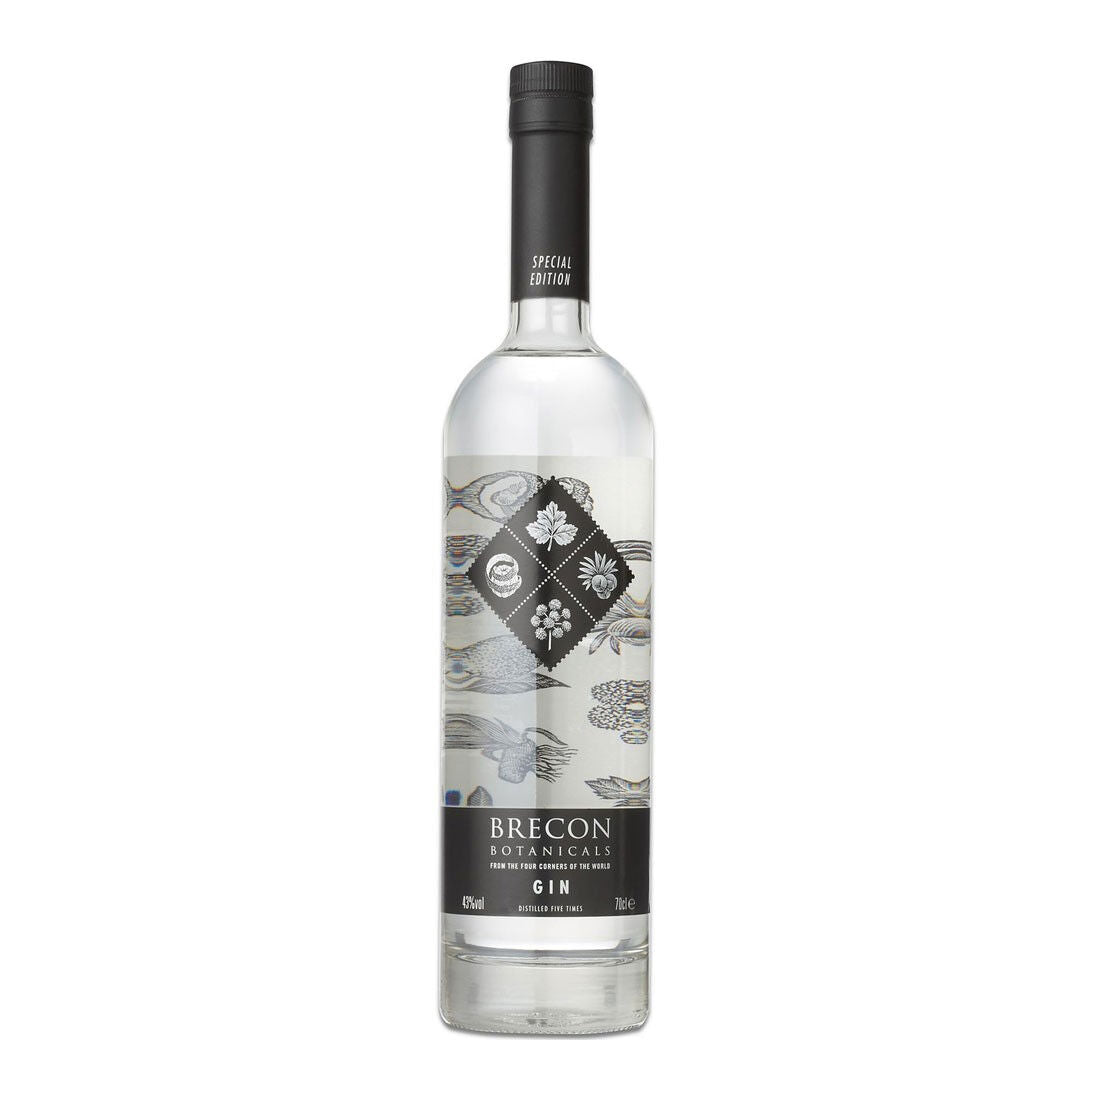 Brecon Botanicals Gin (Wales)